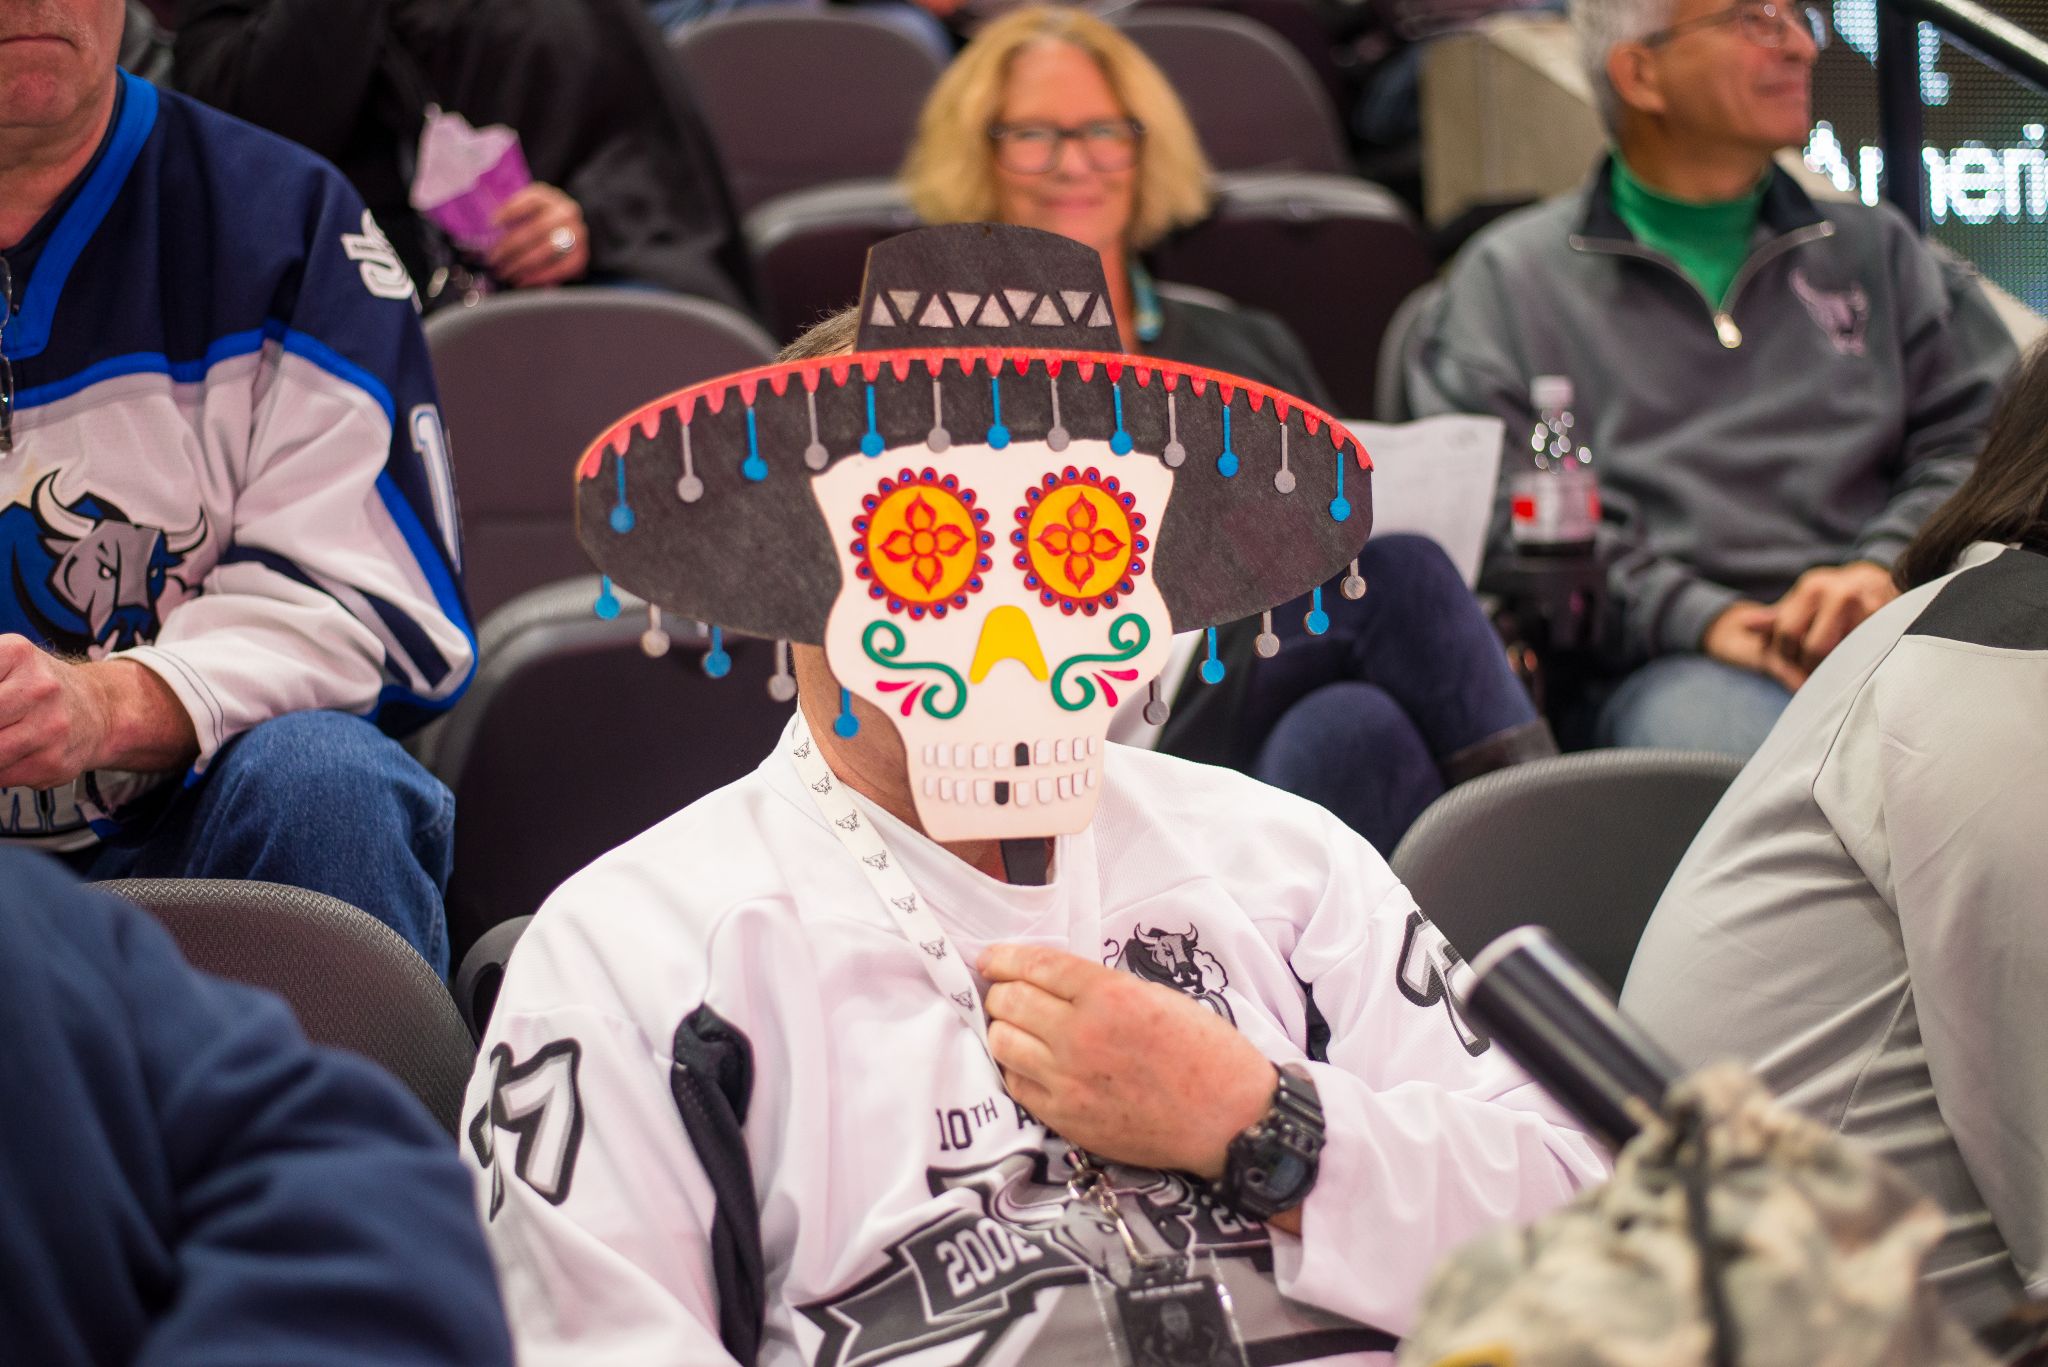 Los Chimuelos are returning for another San Antonio Rampage hockey